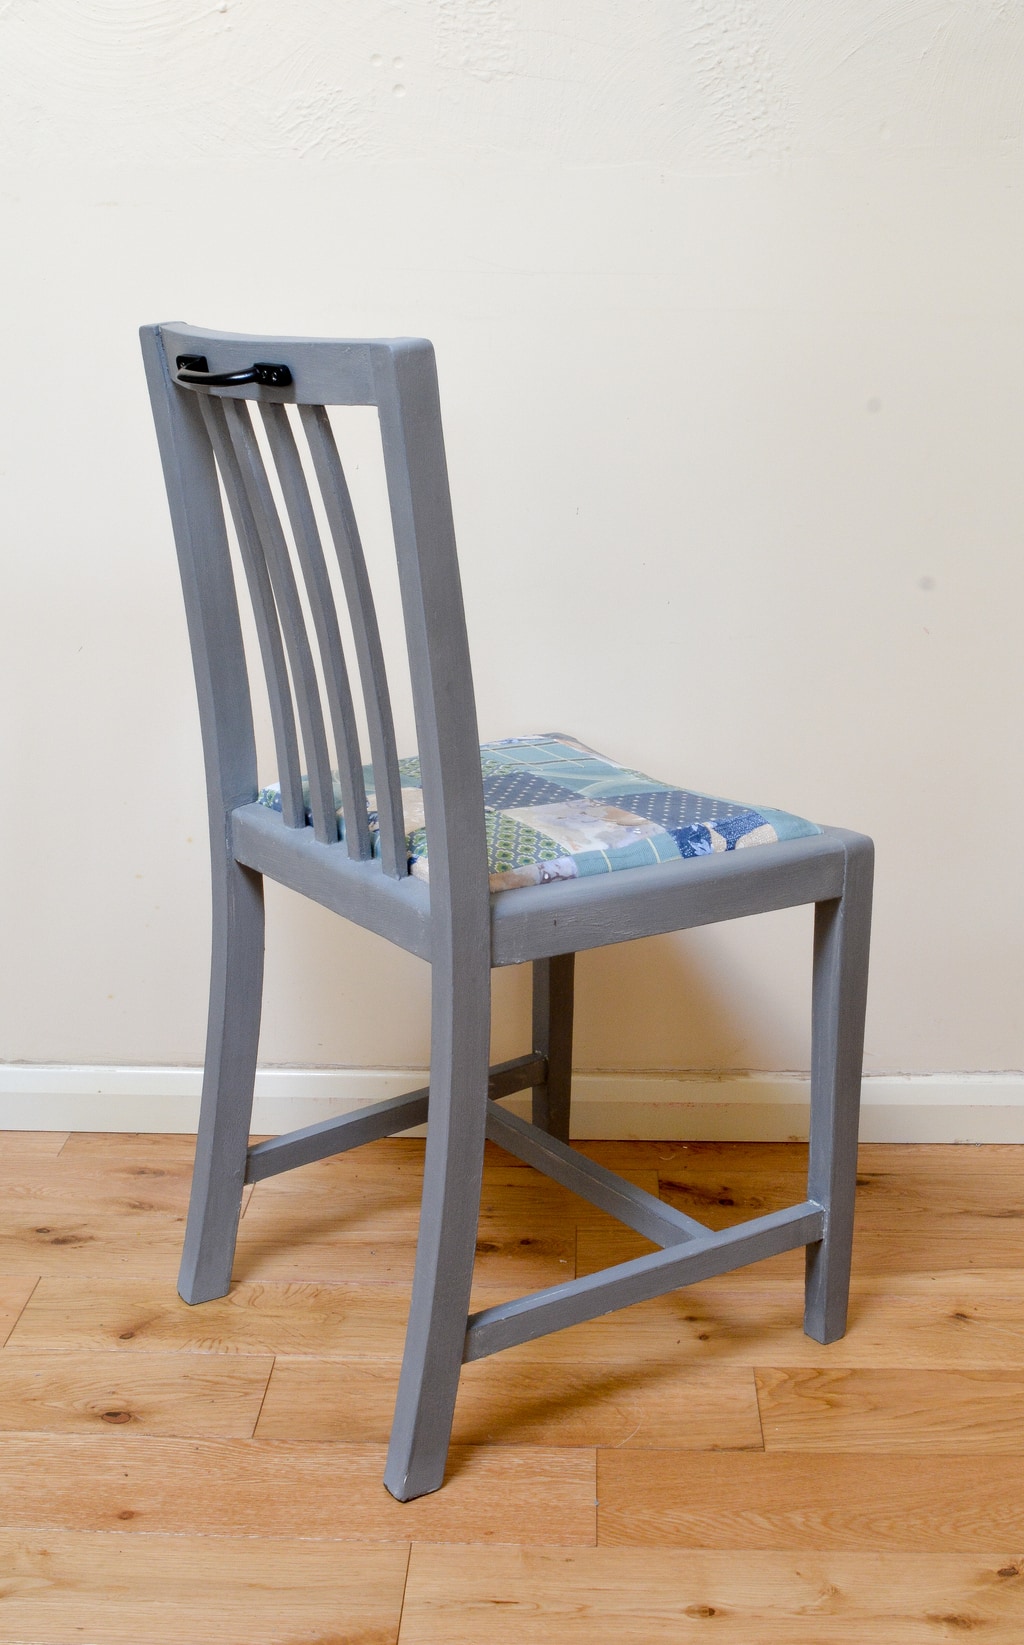 Upcycled Dining Room Chair, waxed stain resistant seats